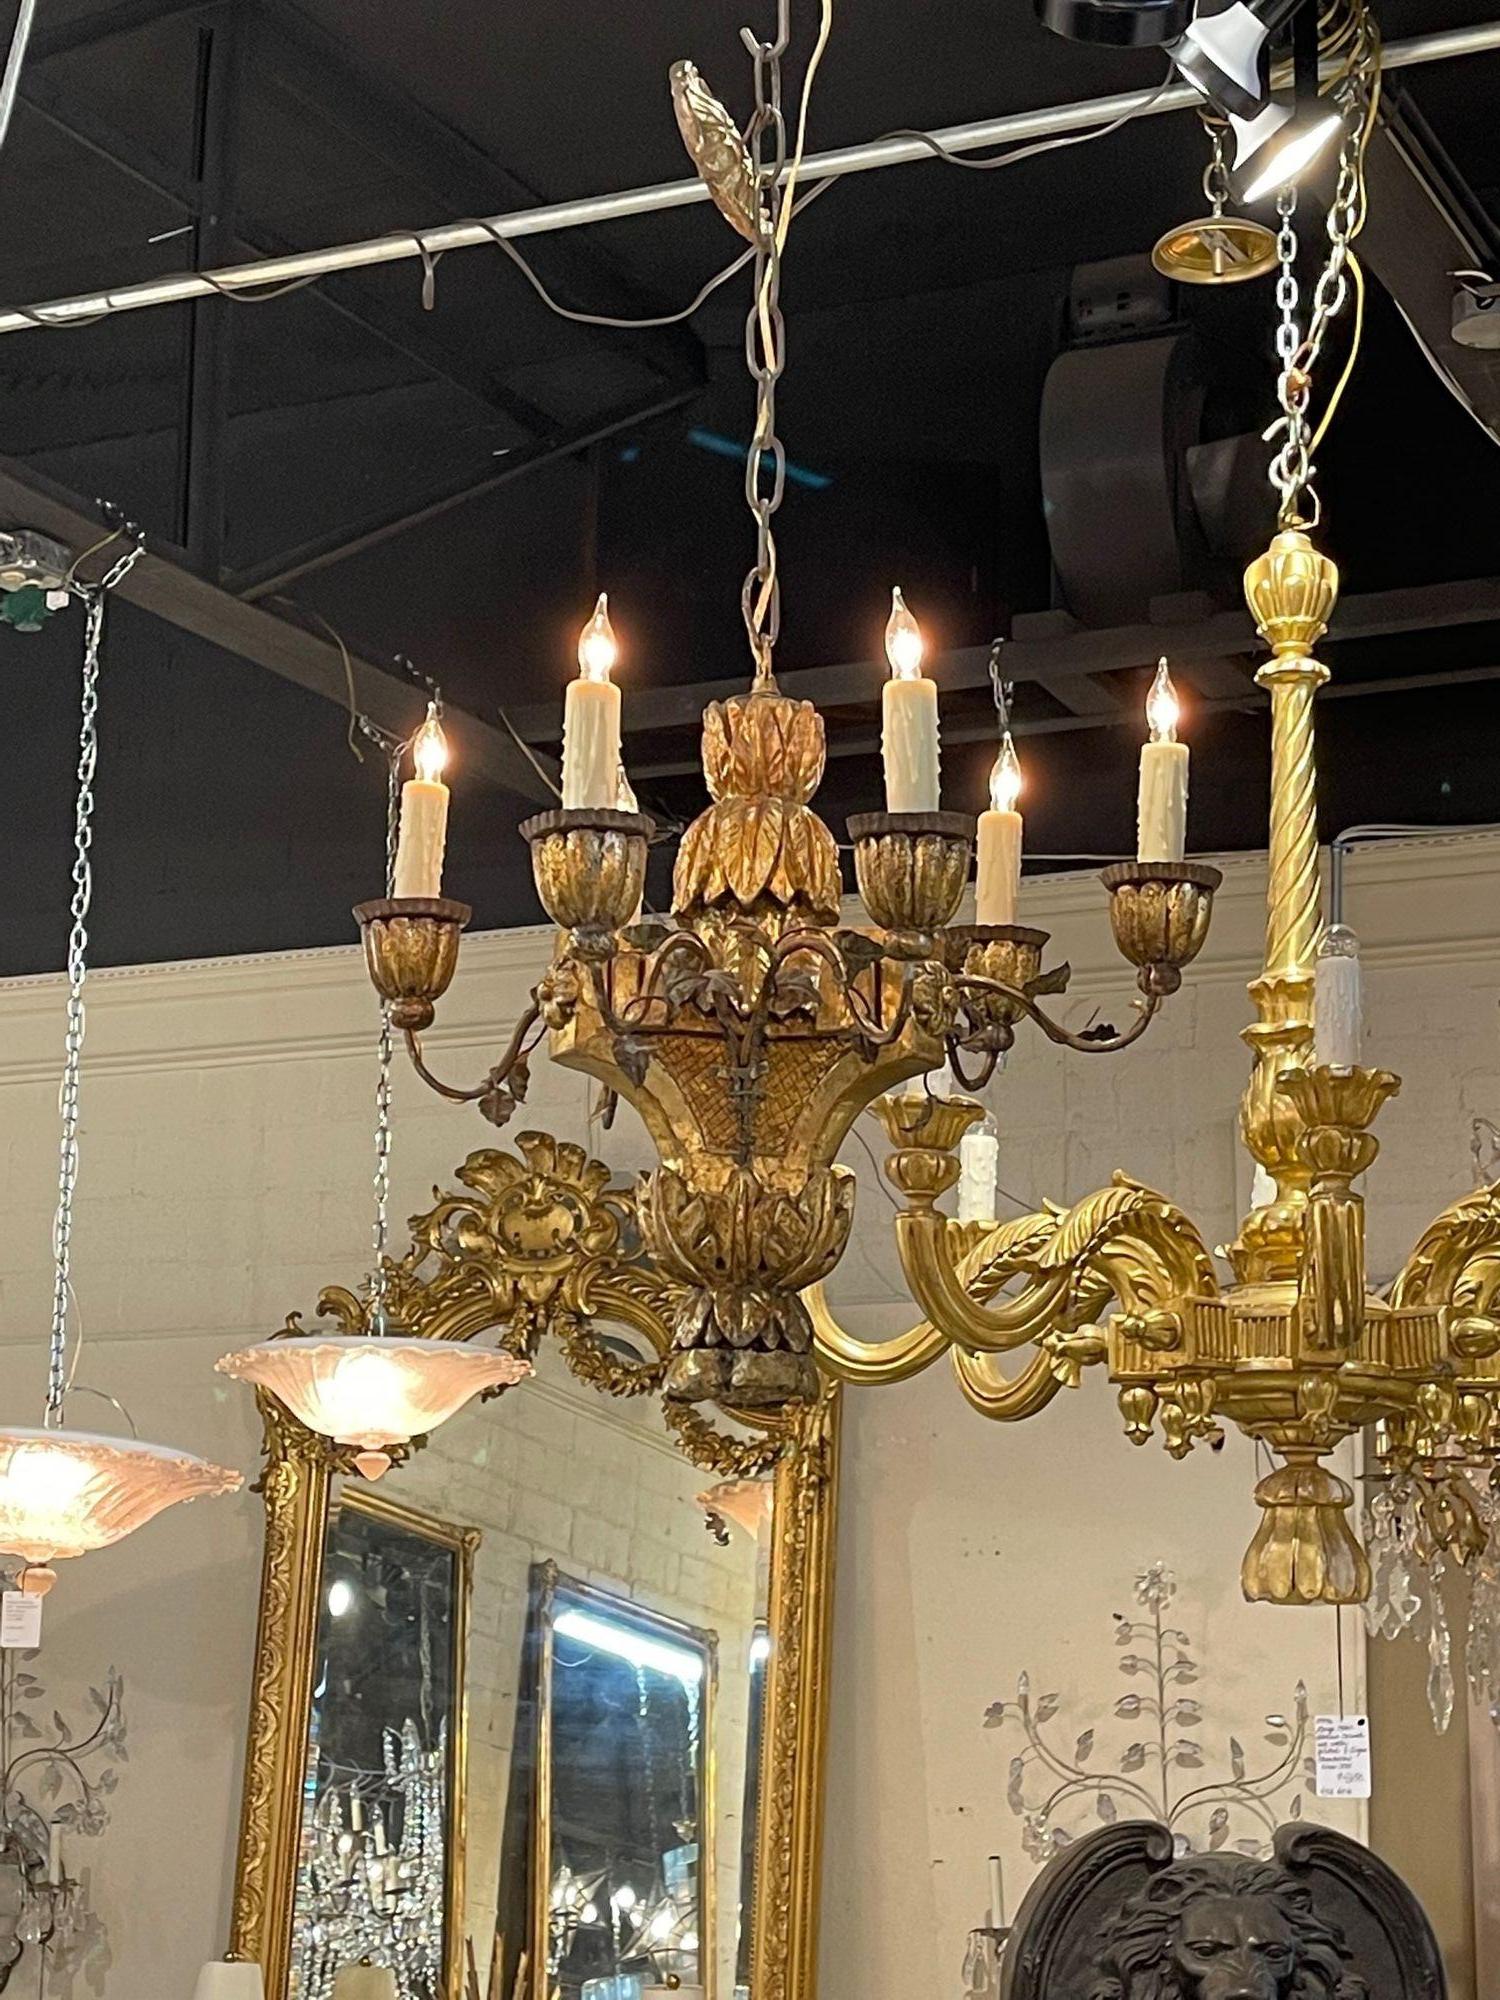 18th century Italian carved and giltwood 6-light chandelier. Circa 1780. The chandelier has been professionally re-wired, cleaned and is ready to hang. Includes matching chain and canopy.